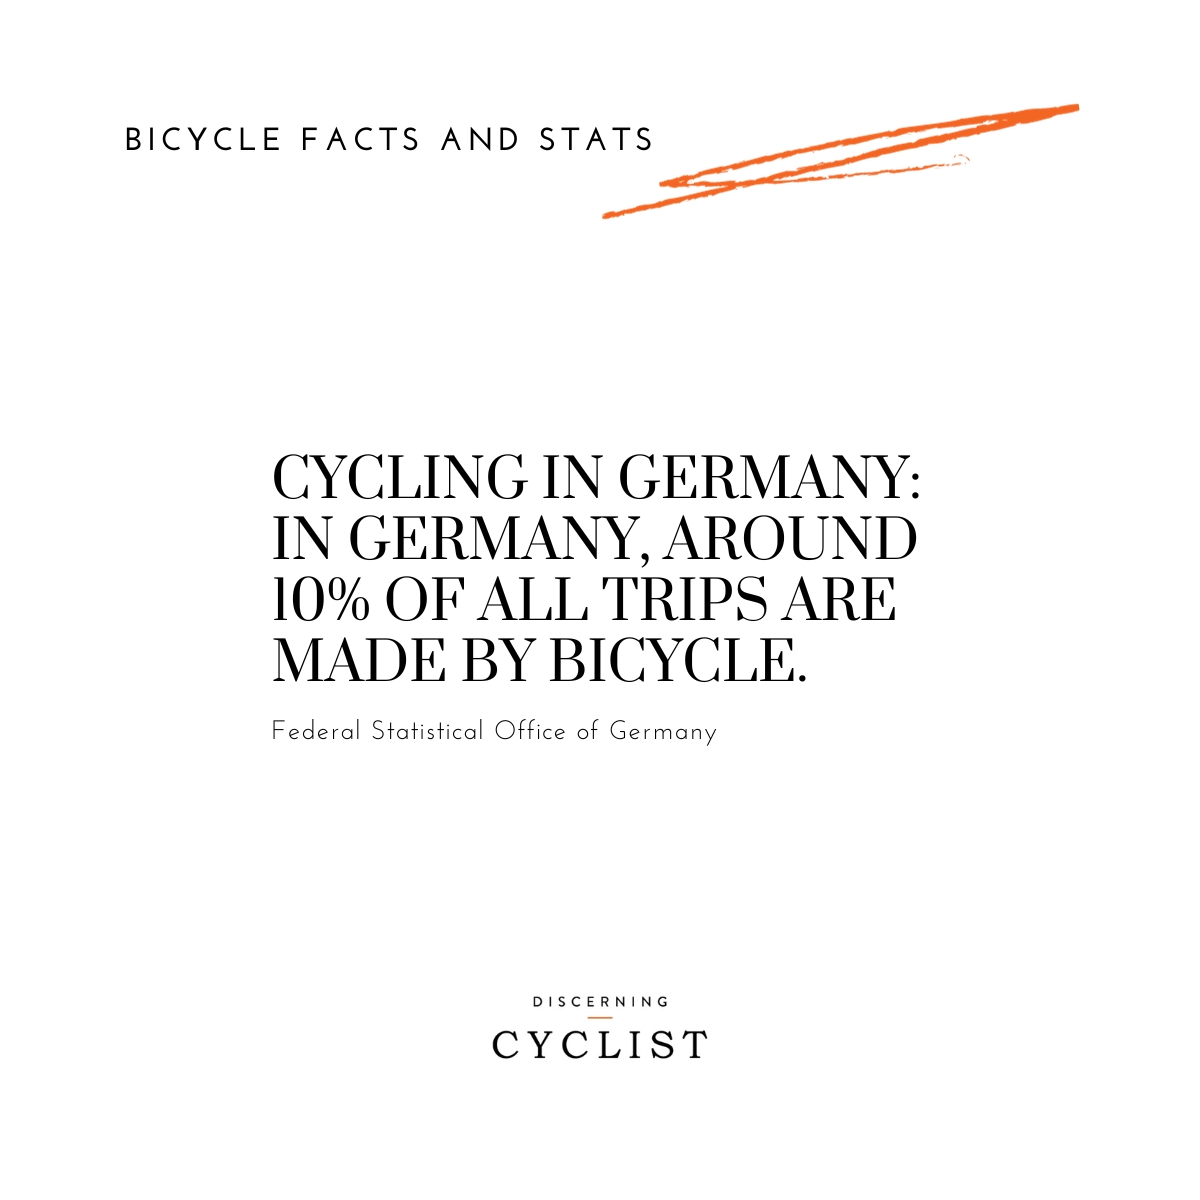 Cycling in Germany: In Germany, around 10% of all trips are made by bicycle.